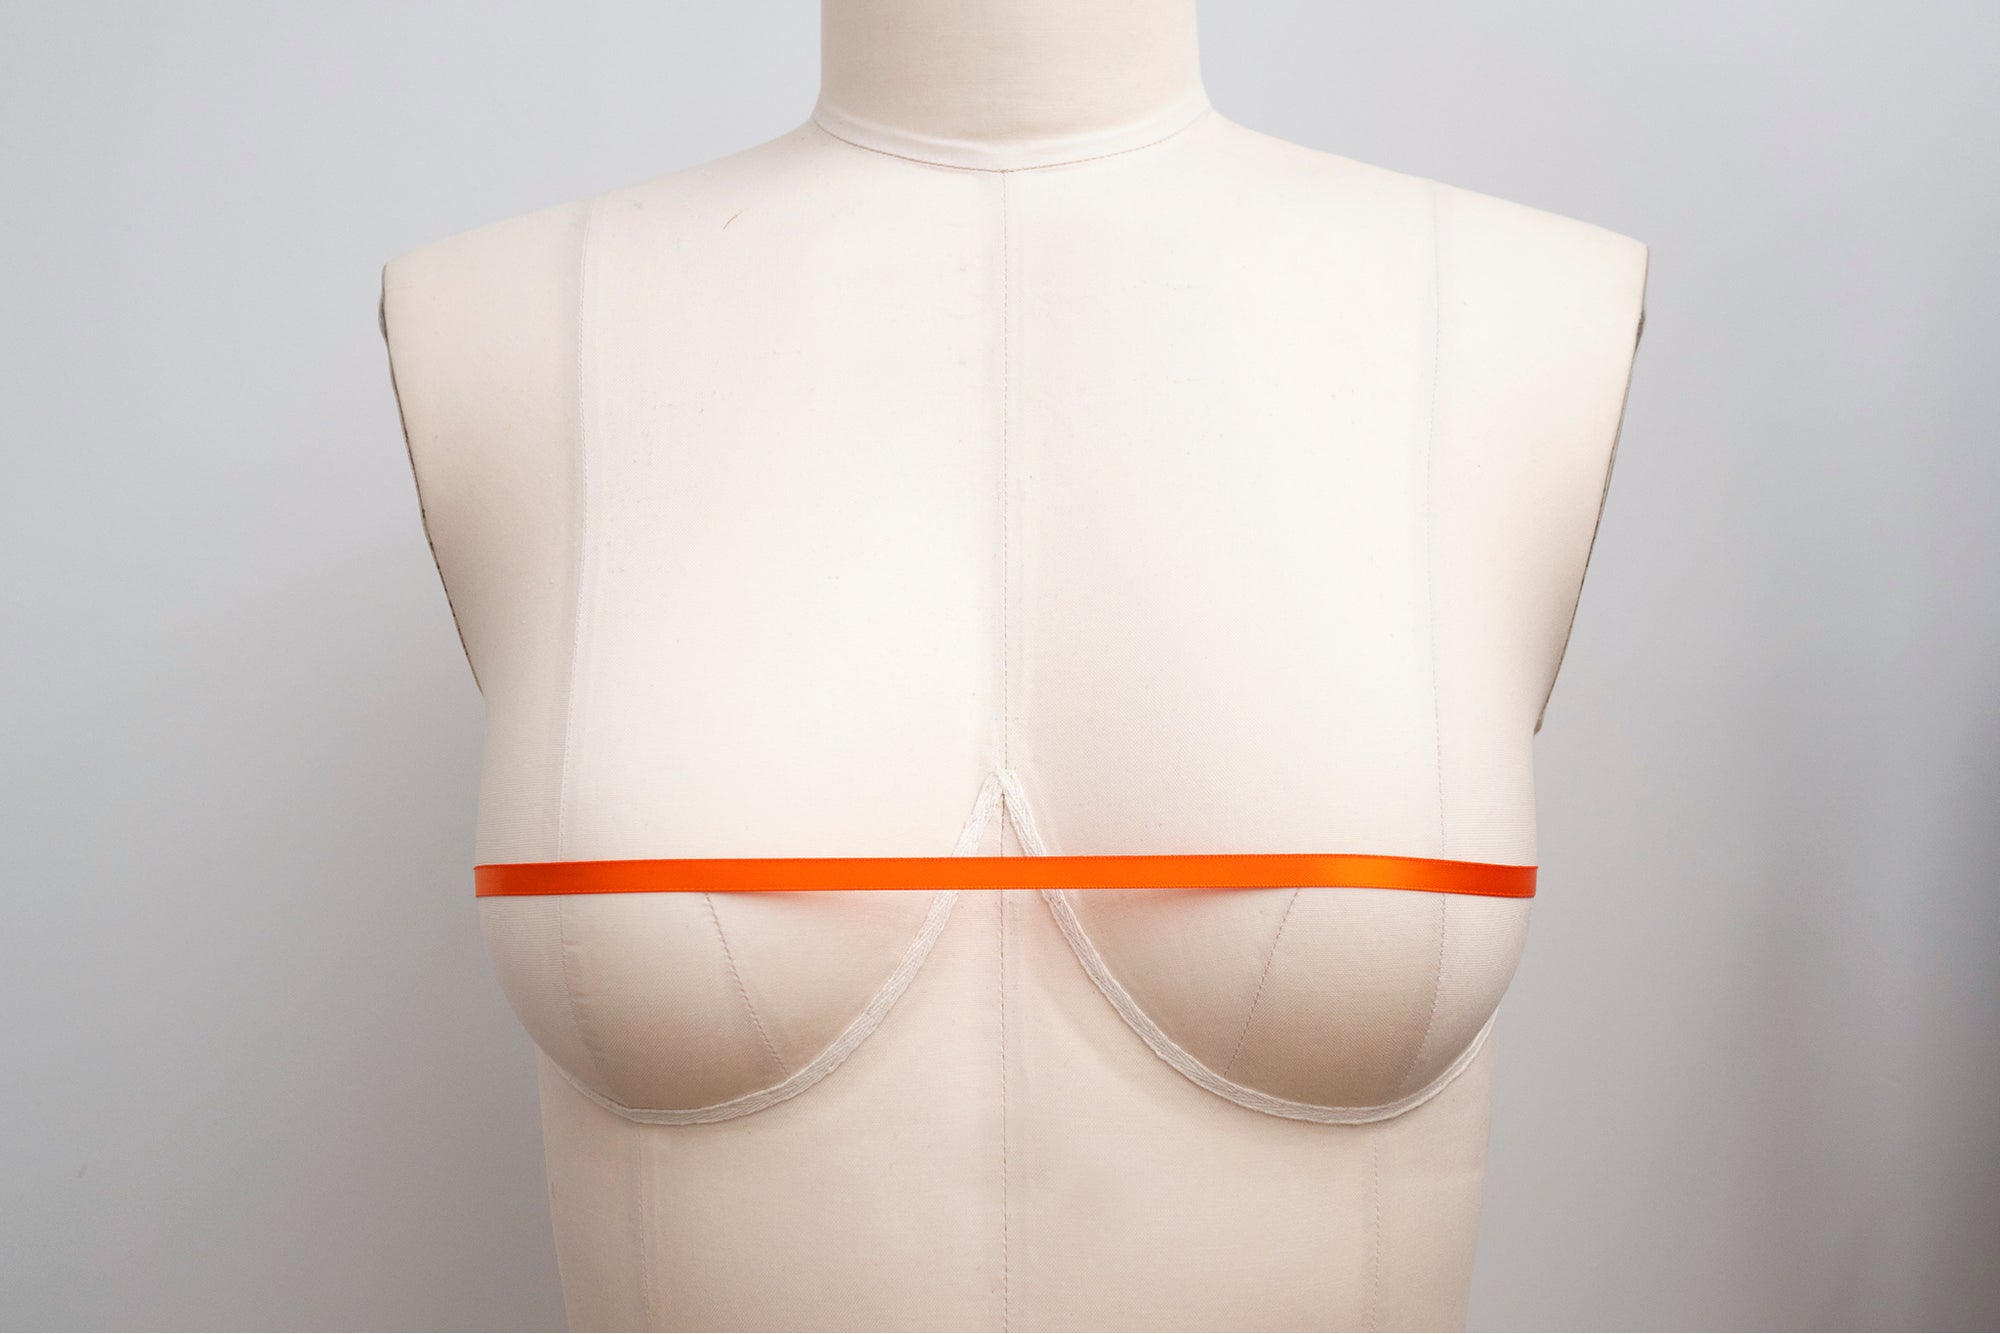 Can You Find Your Bra Size Without Using A Tape Measure? Bra Fitting Like a  Pro! 